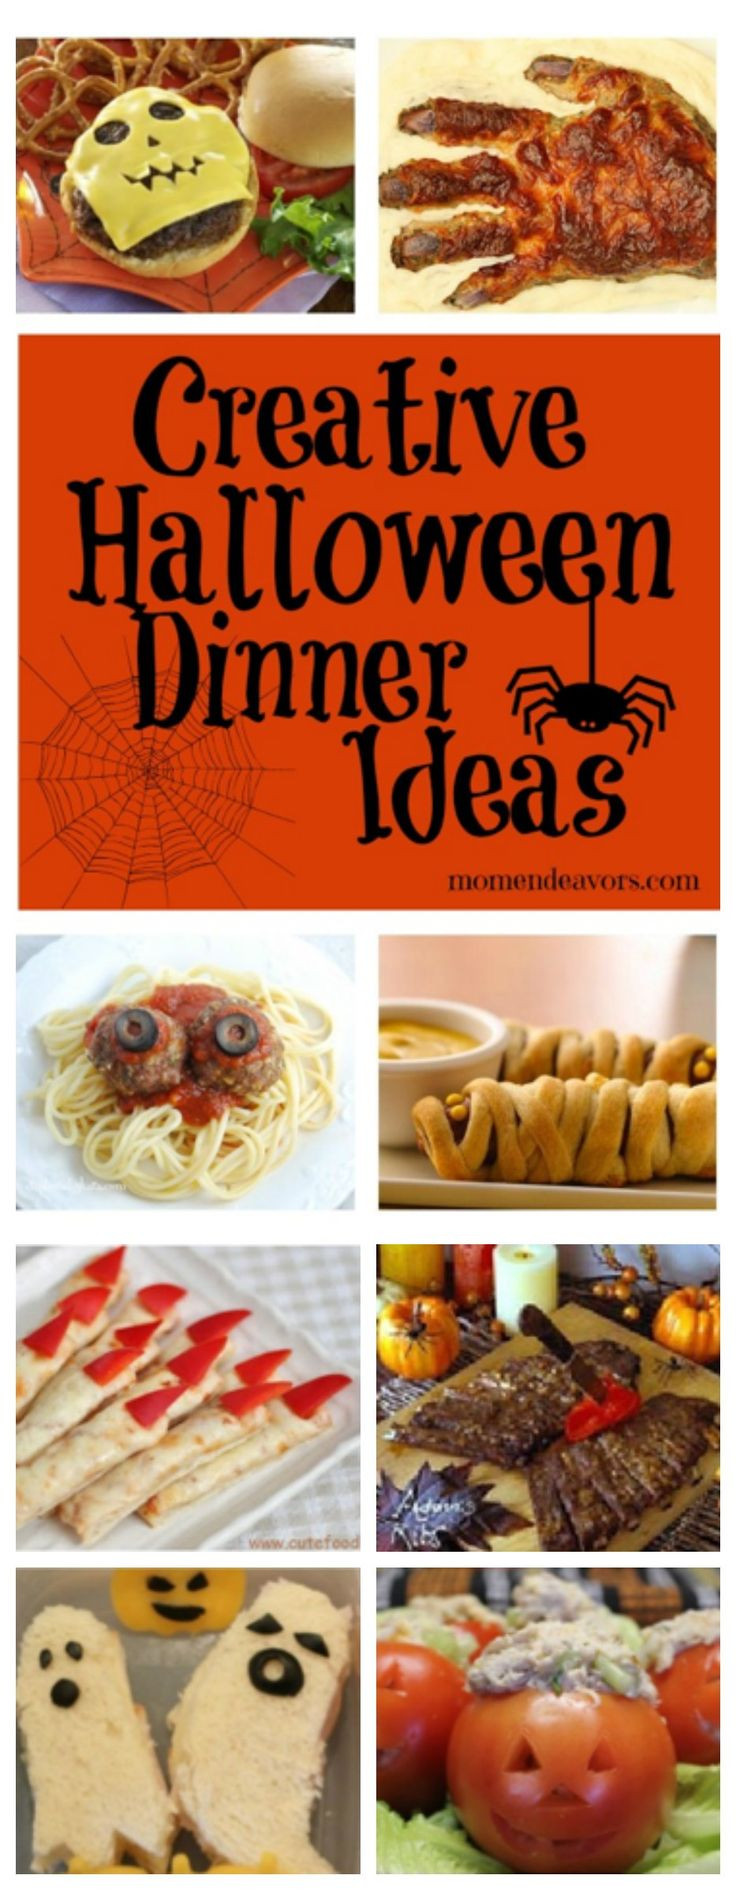 Halloween Side Dishes For Parties
 Best 25 Halloween food dishes ideas on Pinterest